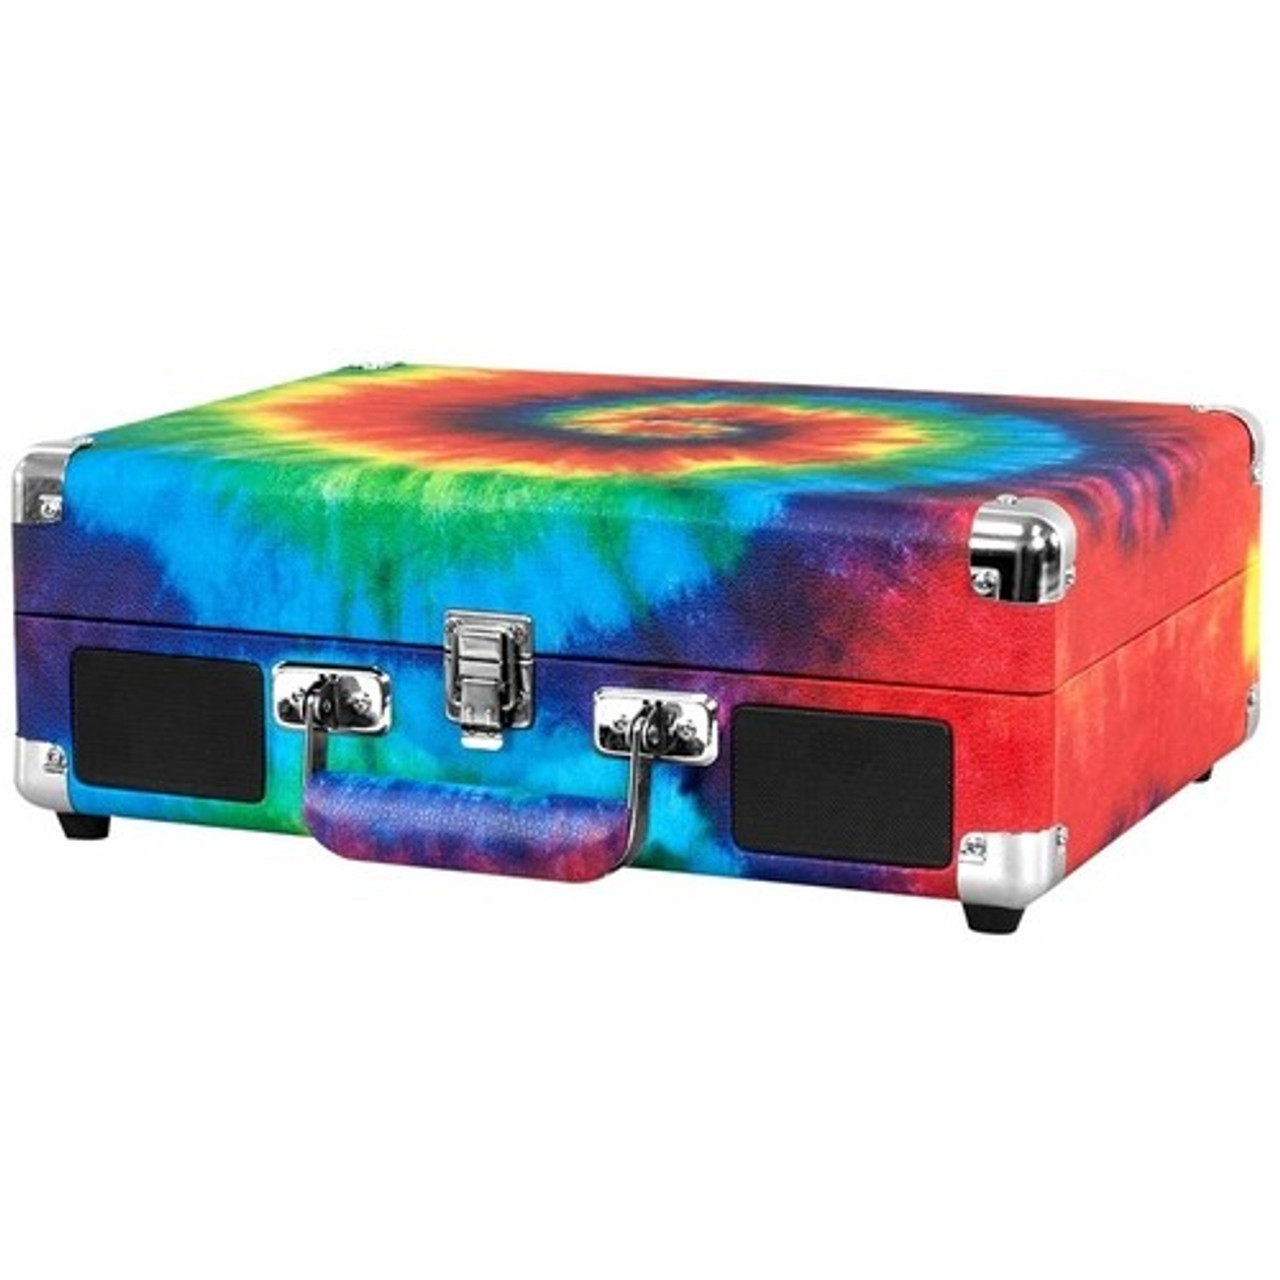 Victrola - Bluetooth Stereo Turntable - Tie-dye